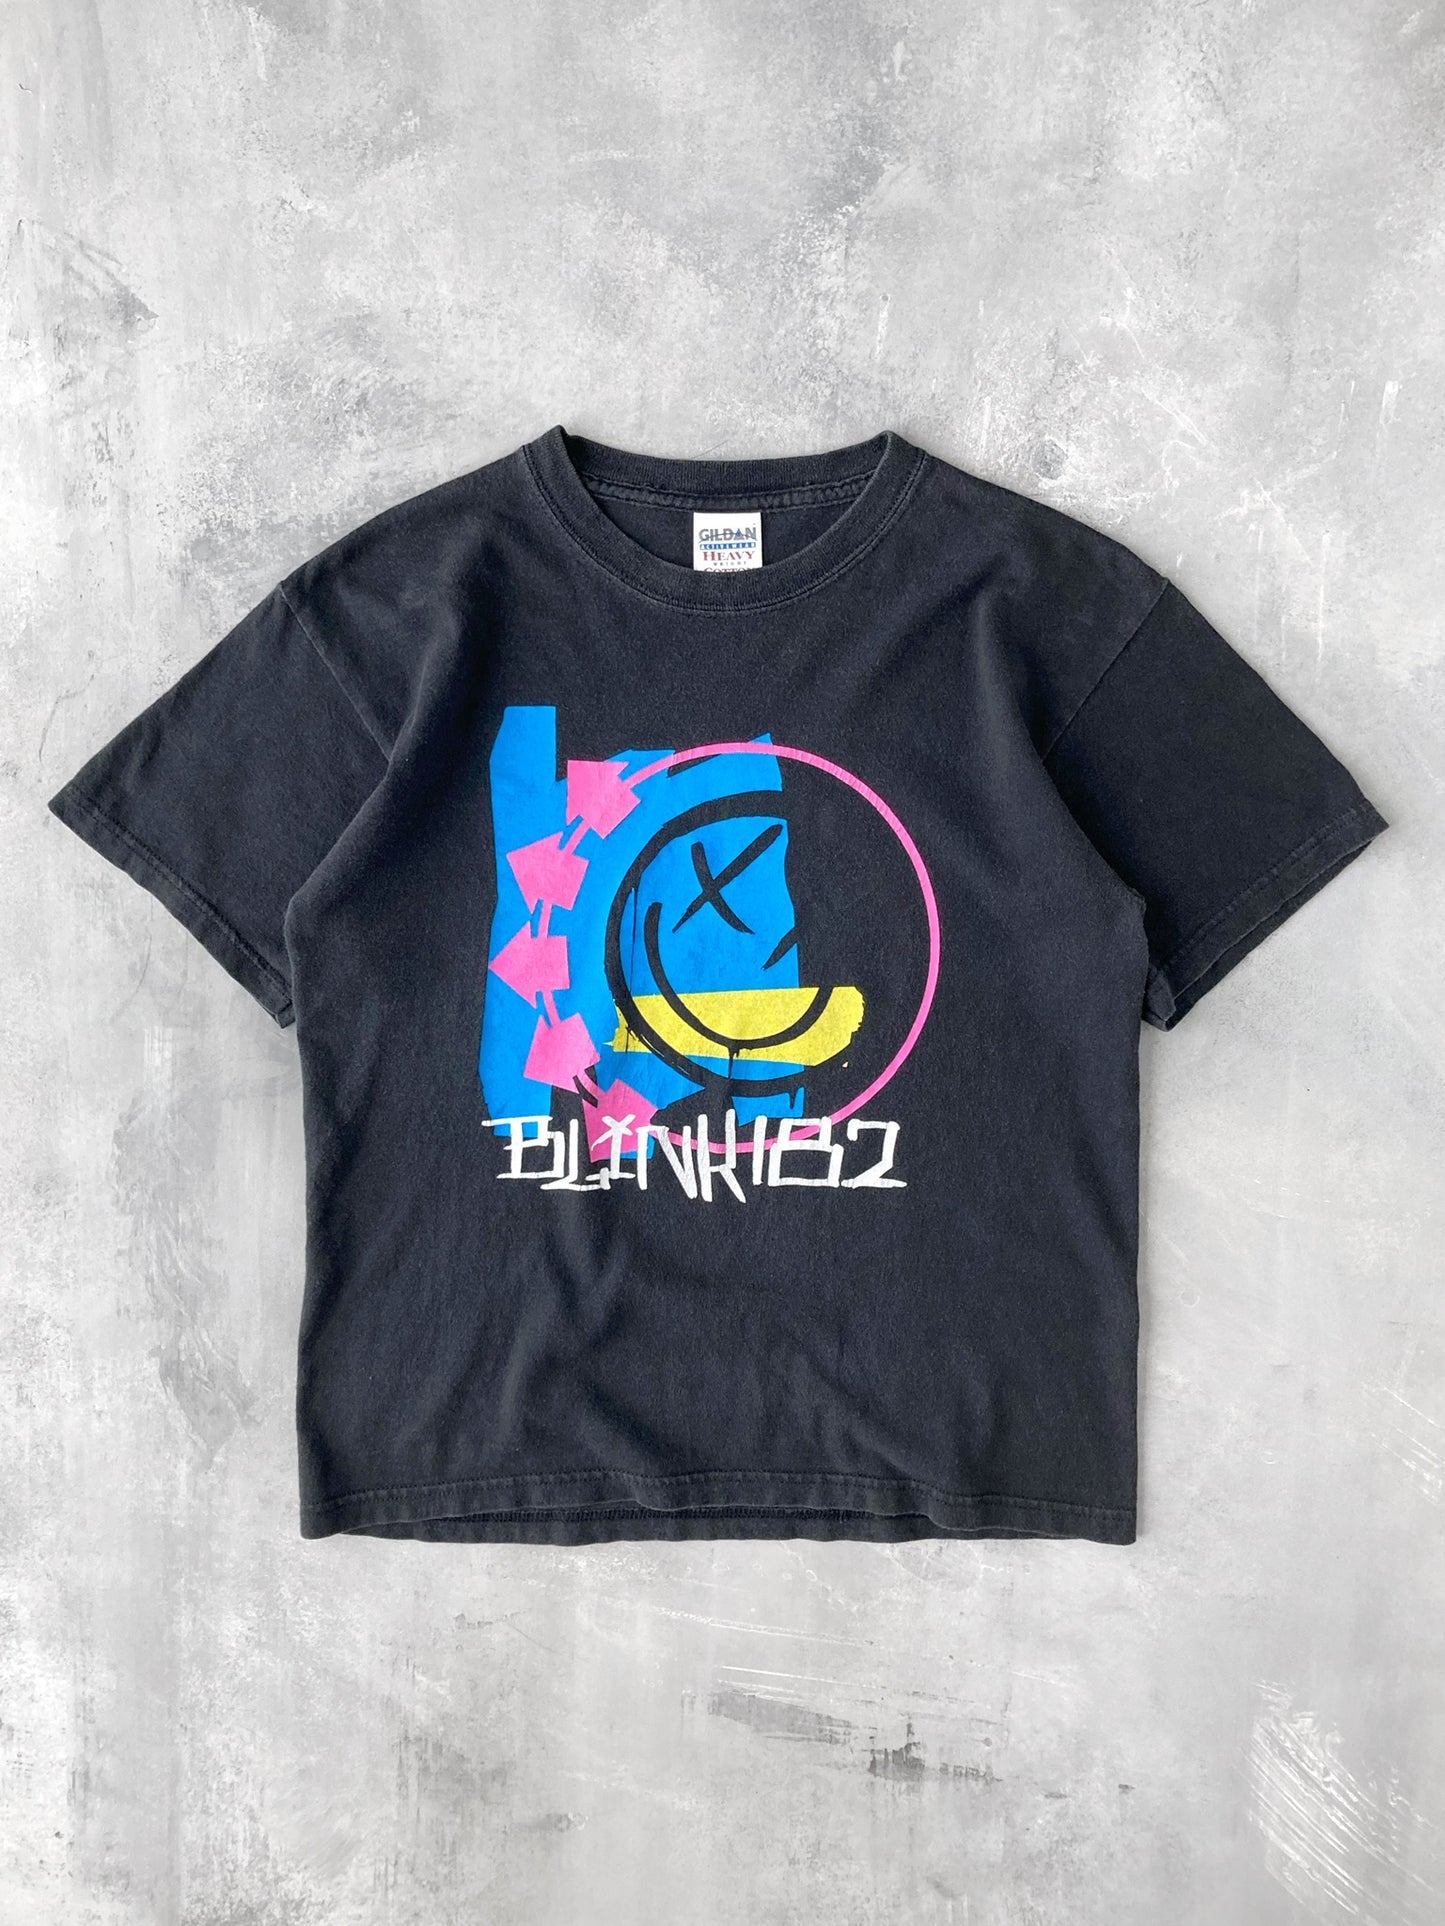 Blink-182 T-Shirt 00's - Small